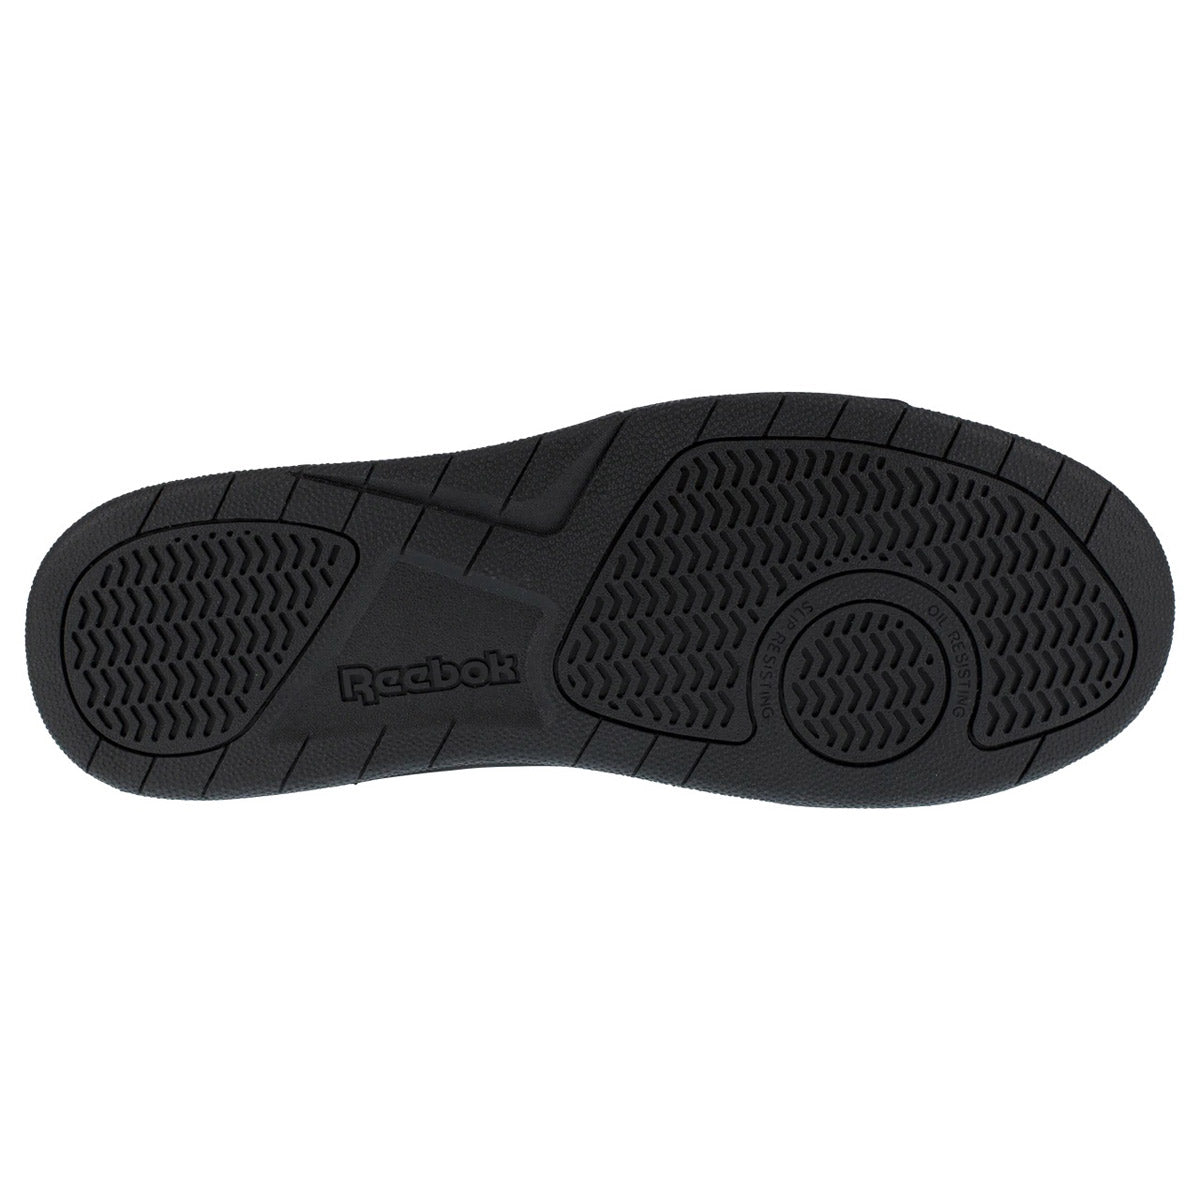 Black Reebok Work Composite Toe BB4500 Mid shoe sole with slip-resistant rubber outsole.